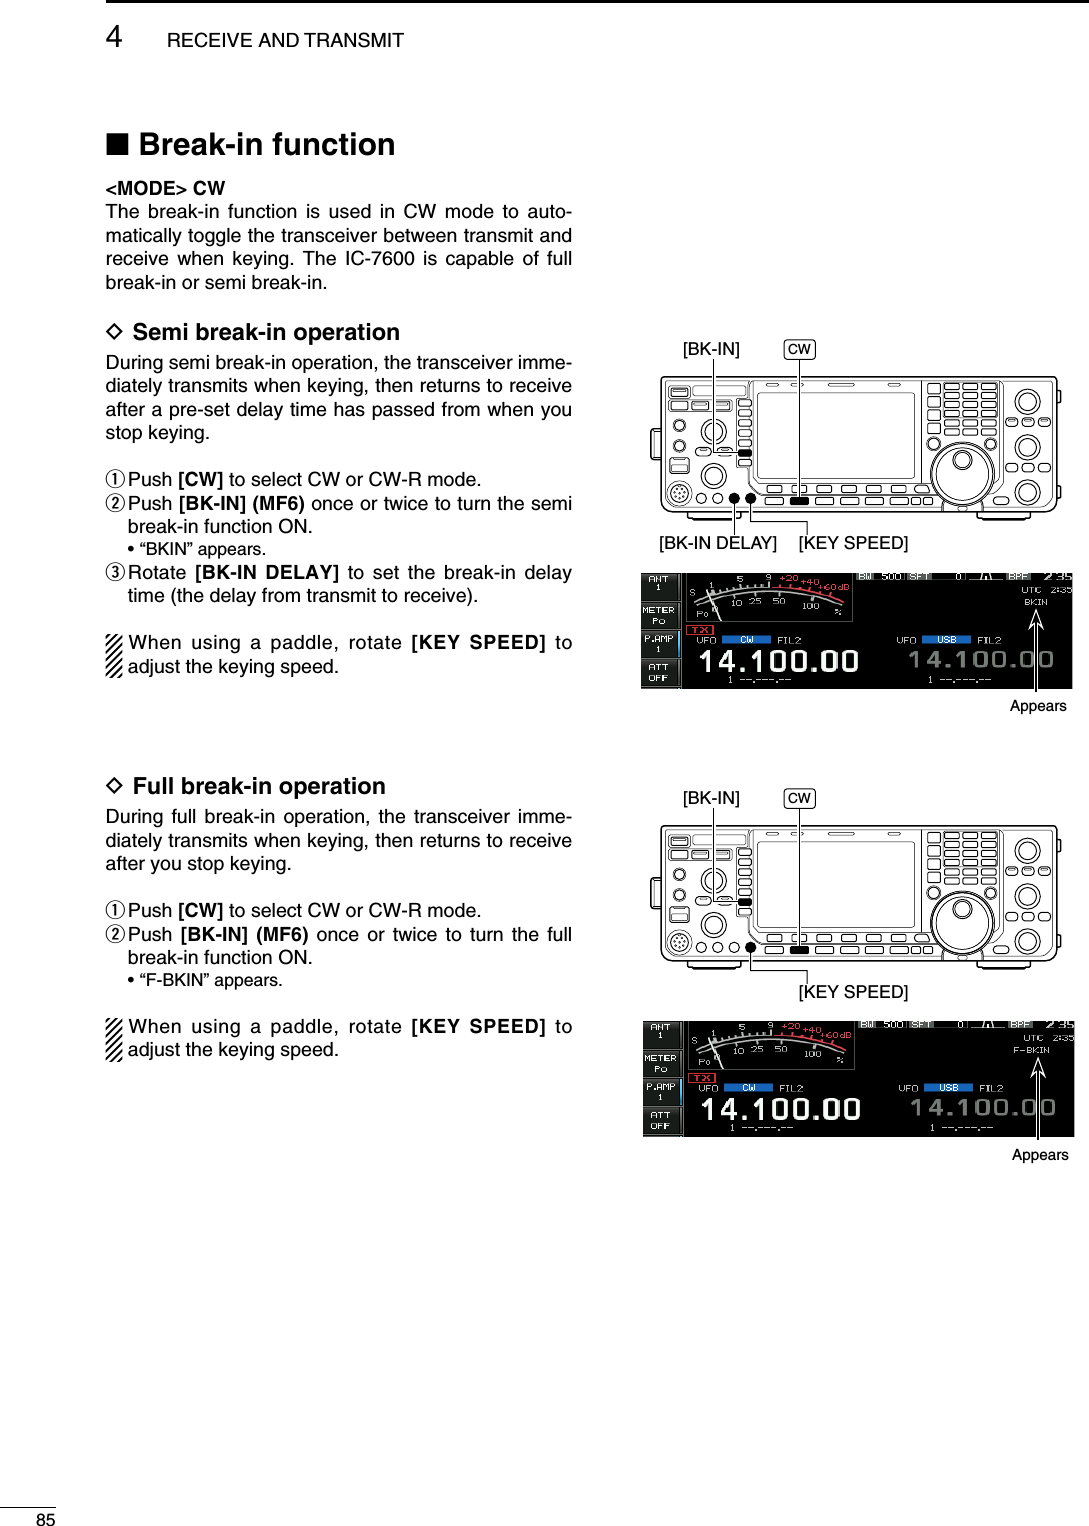 N Break-in function&lt;MODE&gt; CWThe break-in function is used in CW mode to auto-matically toggle the transceiver between transmit and receive when keying. The IC-7600 is capable of full break-in or semi break-in.D Semi break-in operationDuring semi break-in operation, the transceiver imme-diately transmits when keying, then returns to receive after a pre-set delay time has passed from when you stop keying.q Push  [CW] to select CW or CW-R mode.w  Push [BK-IN] (MF6) once or twice to turn the semi break-in function ON. • “BKIN” appears.e  Rotate  [BK-IN DELAY] to set the break-in delay time (the delay from transmit to receive).When using a paddle, rotate [KEY SPEED] to adjust the keying speed.D Full break-in operationDuring full break-in operation, the transceiver imme-diately transmits when keying, then returns to receive after you stop keying.q Push  [CW] to select CW or CW-R mode.w  Push  [BK-IN] (MF6) once or twice to turn the full break-in function ON. • “F-BKIN” appears.When using a paddle, rotate [KEY SPEED] to adjust the keying speed.[BK-IN DELAY] [KEY SPEED][BK-IN] CW[KEY SPEED][BK-IN] CWAppearsAppears854RECEIVE AND TRANSMIT